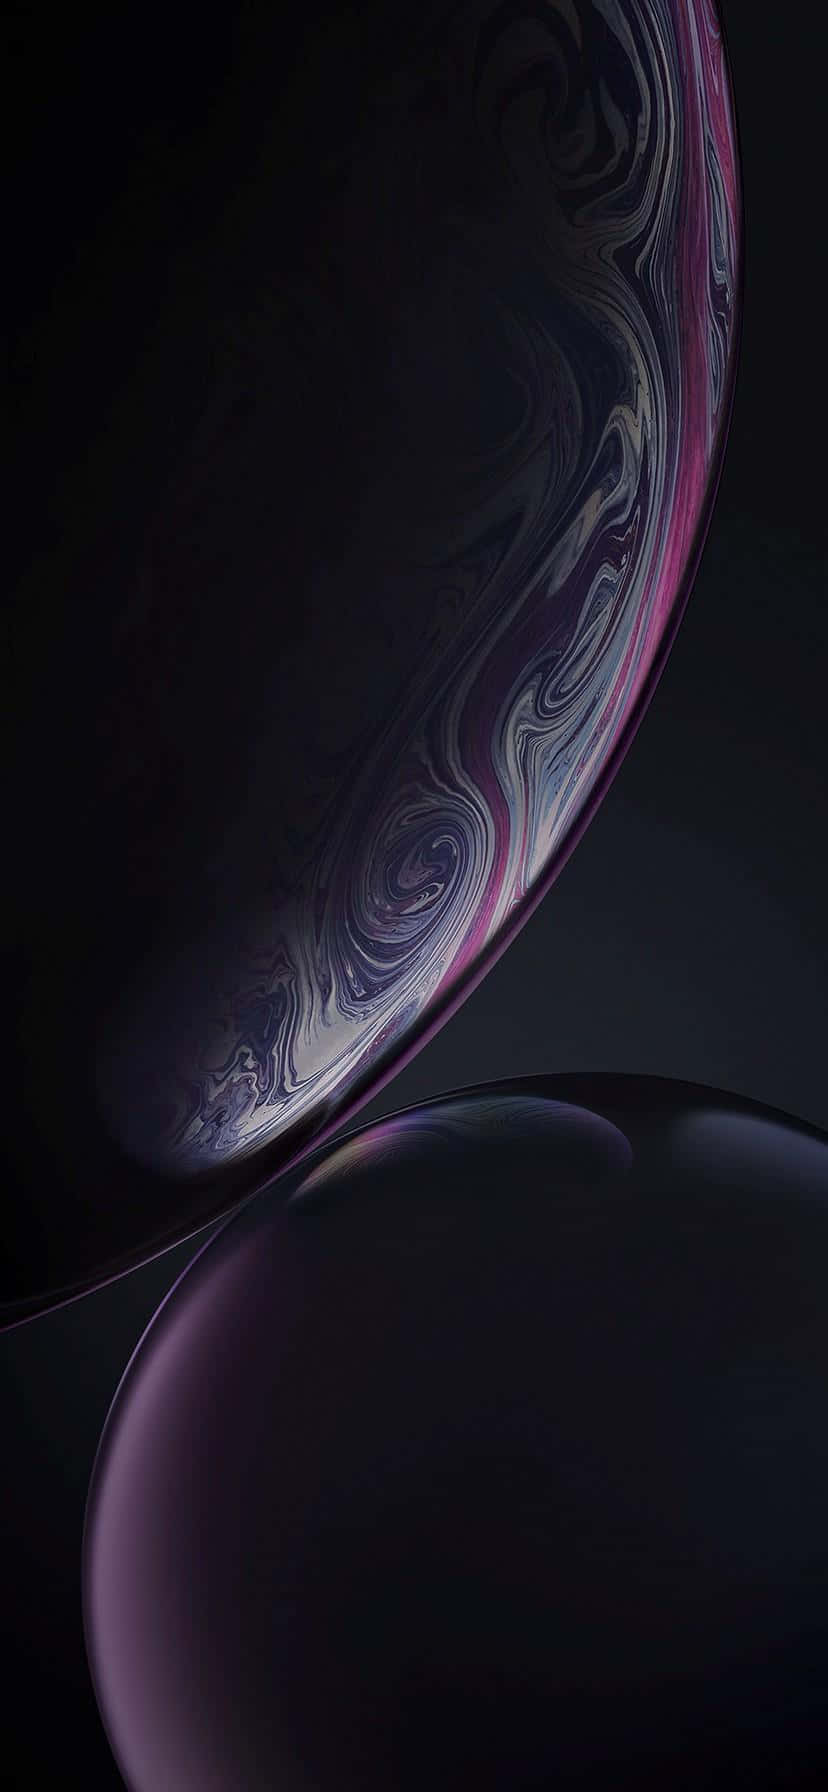 A Black Background With A Purple Swirl Wallpaper